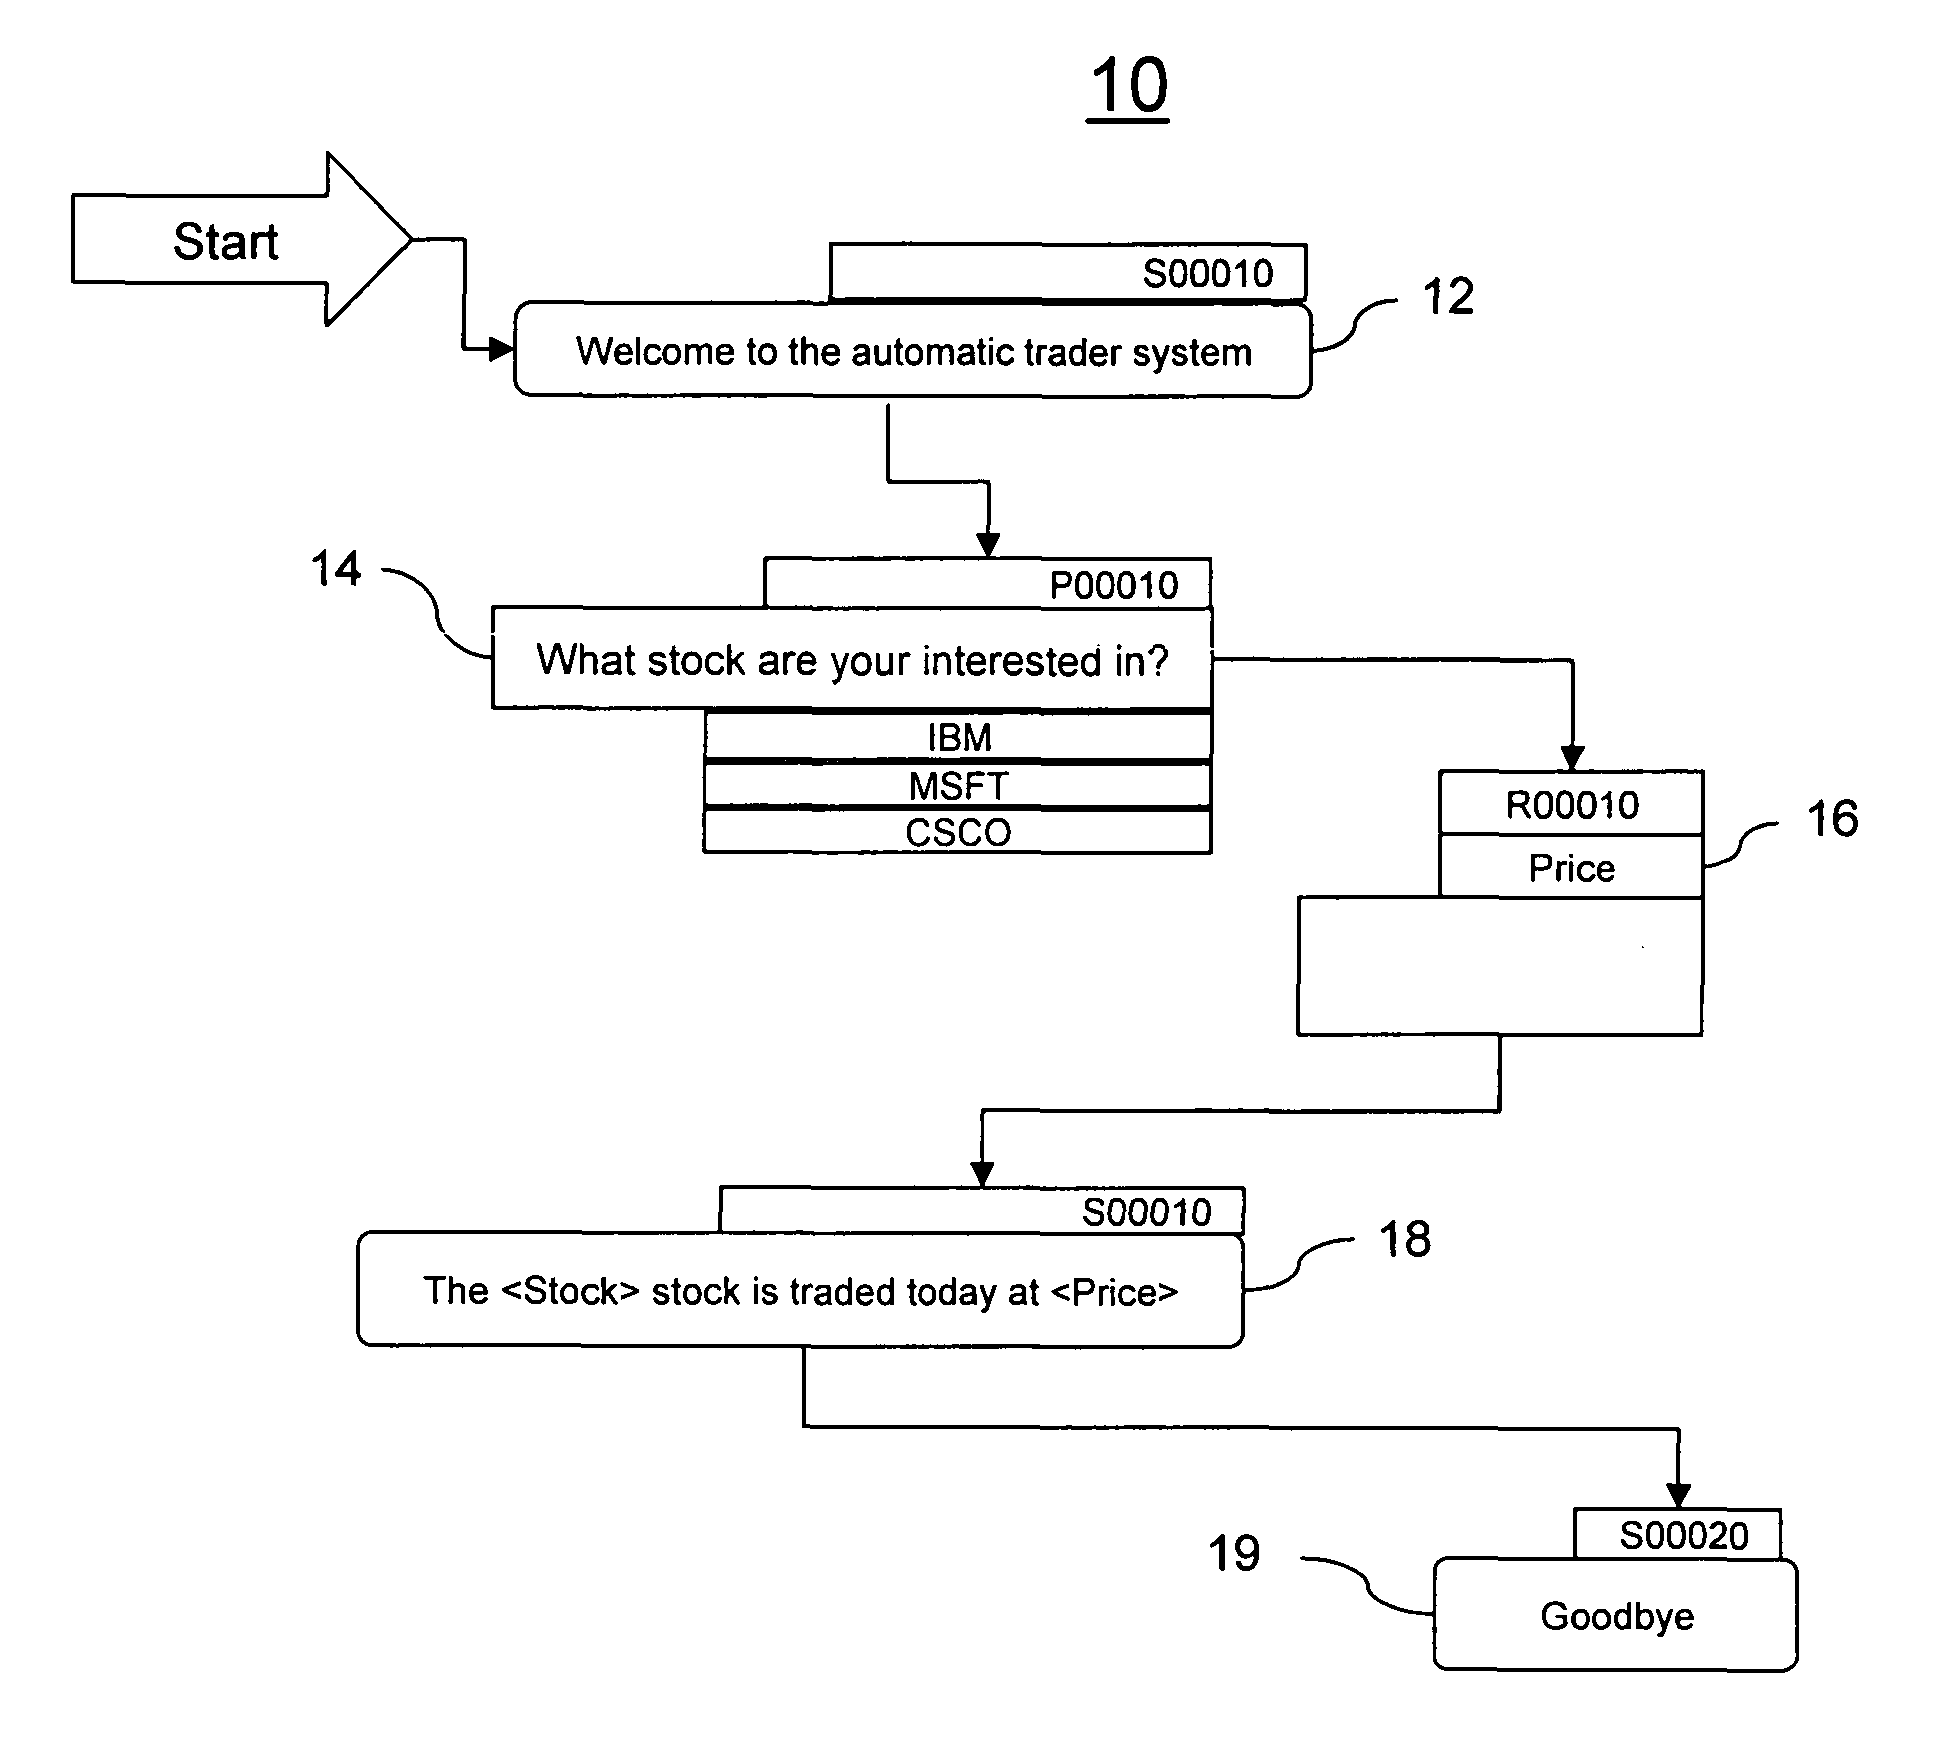 Method and system for switching between prototype and real code production in a graphical call flow builder